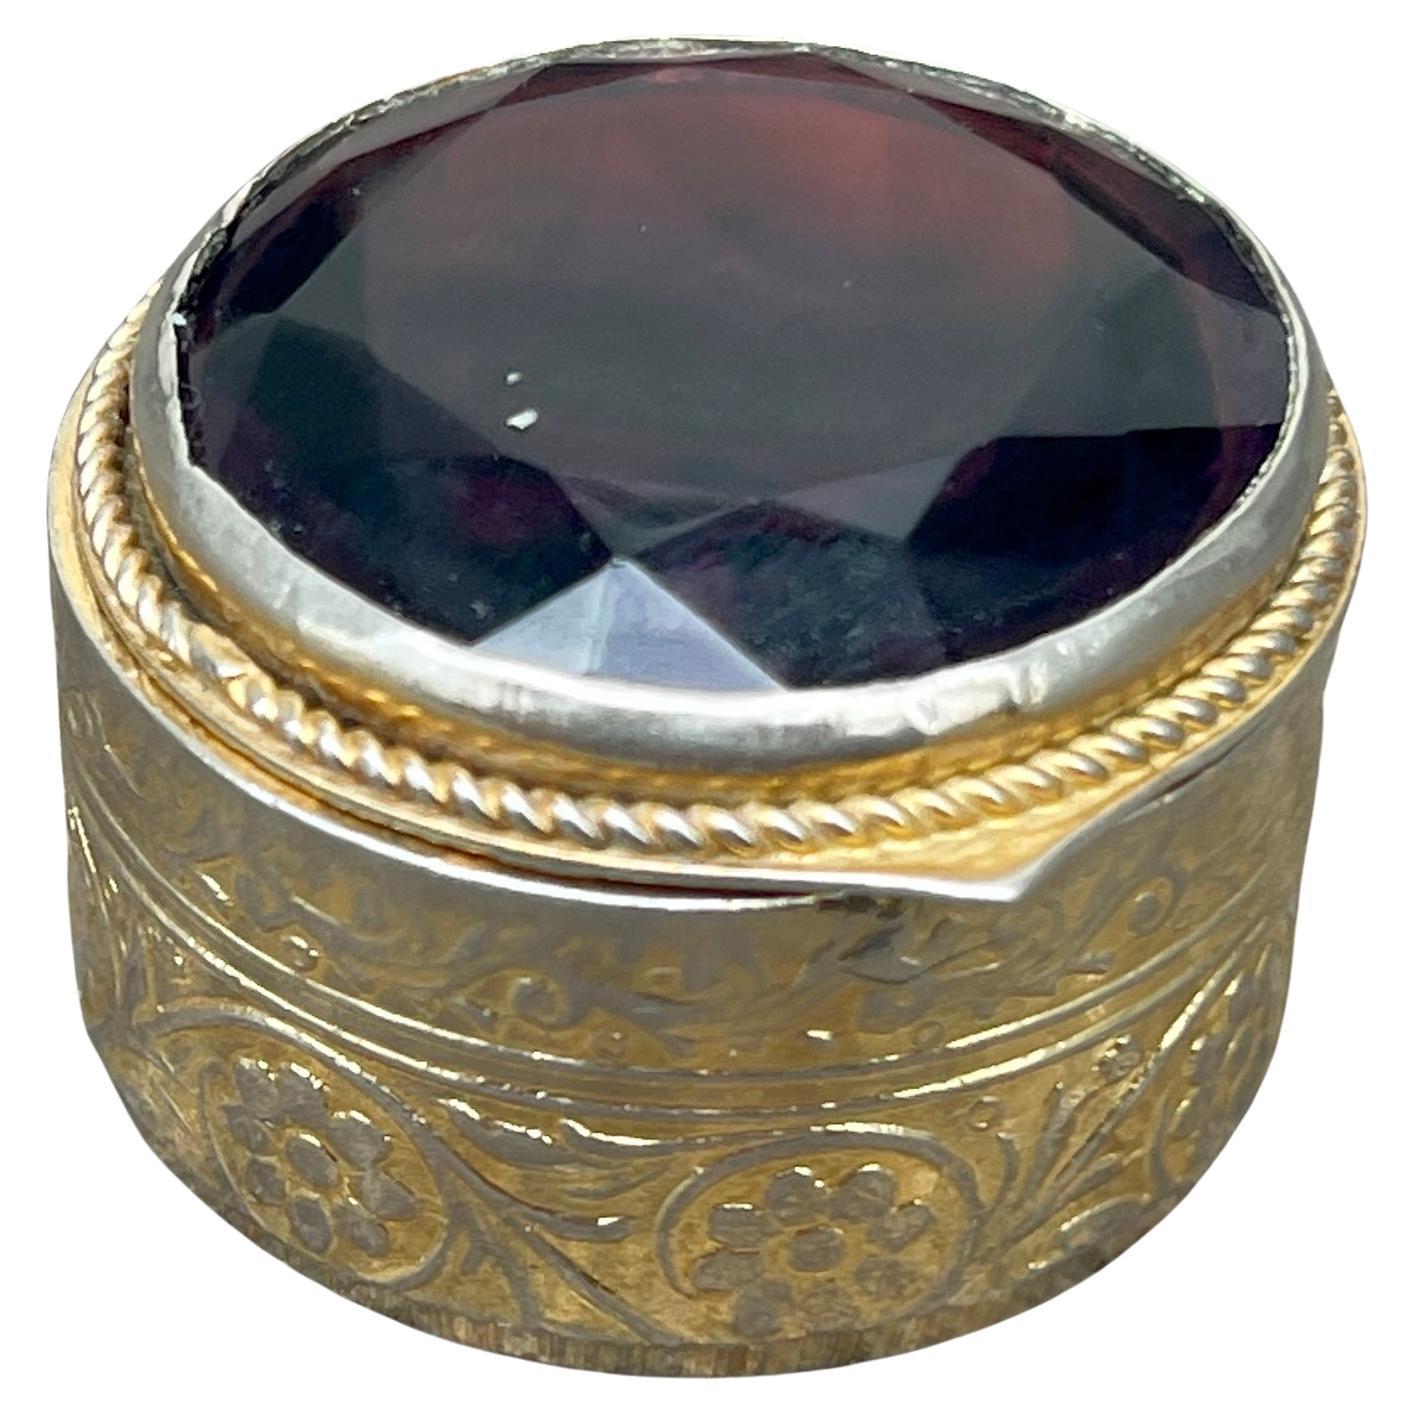 Late 19th Century Gilt Metal Pill Box with Beveled Burgundy Glass Top